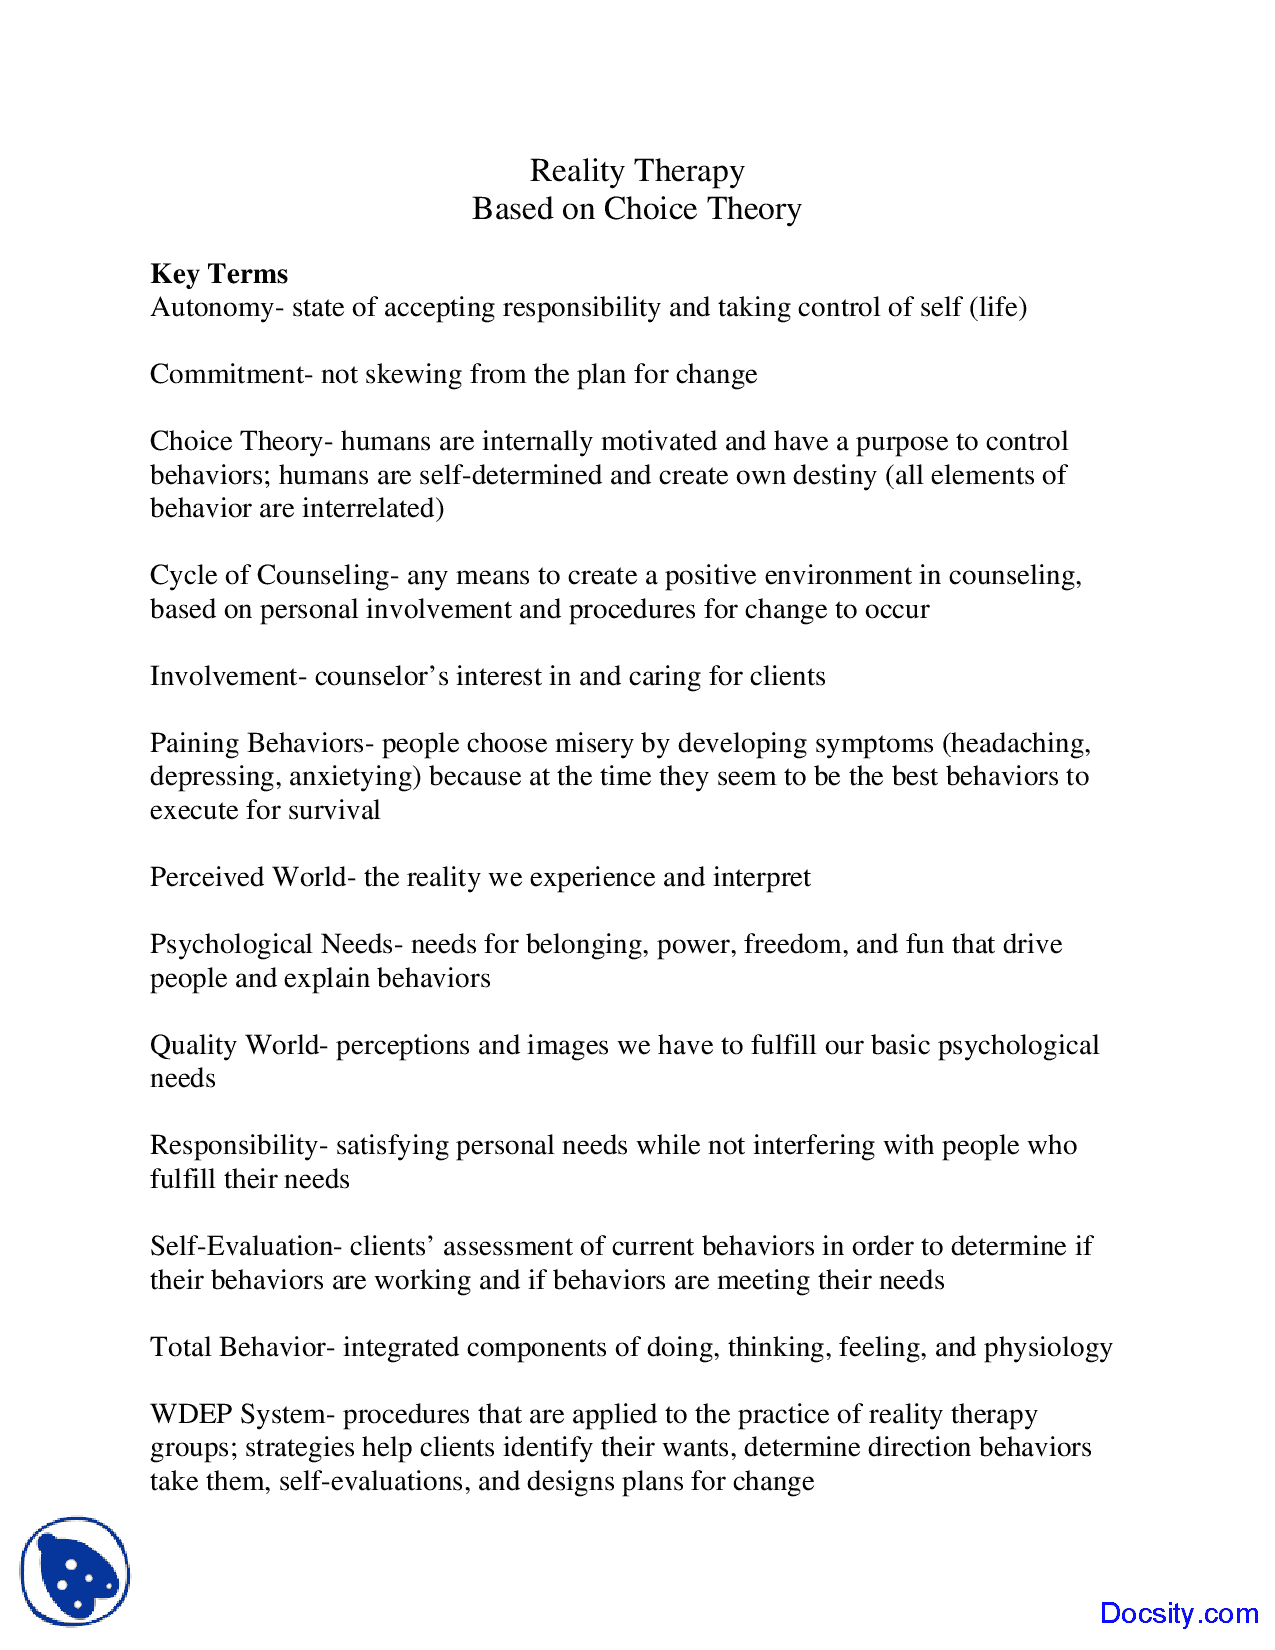 Reality Therapy  Theories Of Counseling  Lecture Notes  Docsity